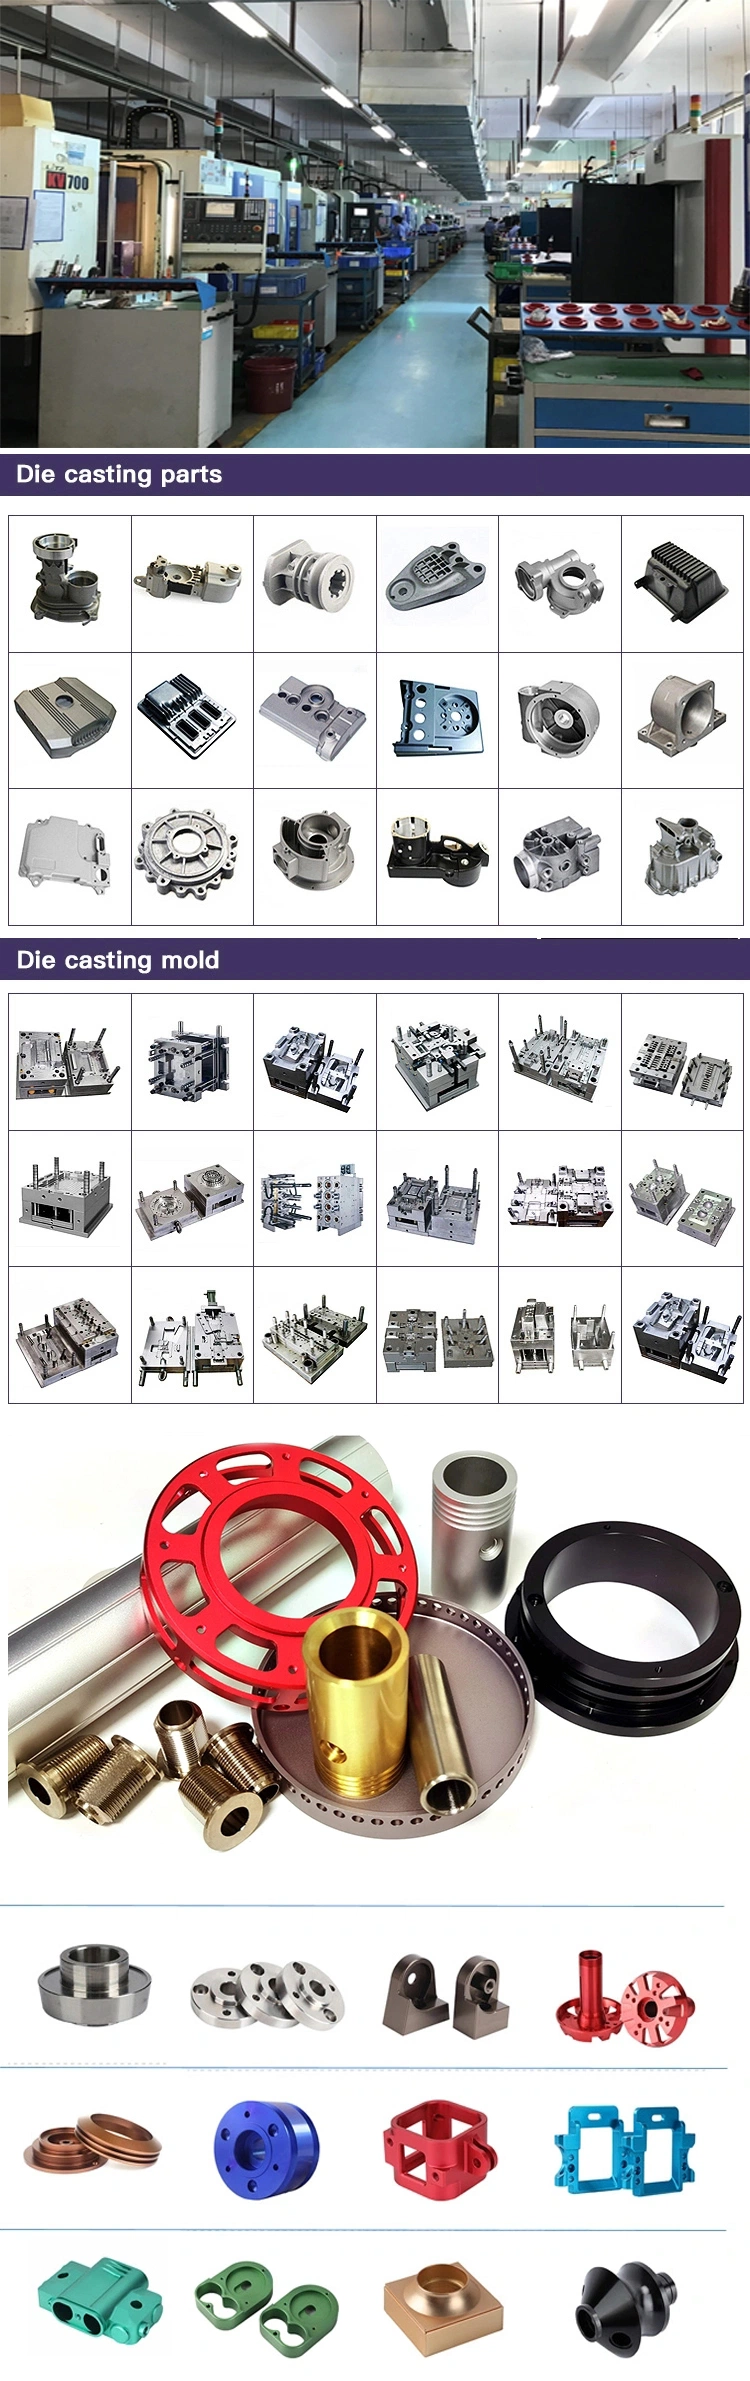 Custom Manufacturer of Precision Rapid Prototype and Produce Metal and Plastic CNC Machined Prototype Parts